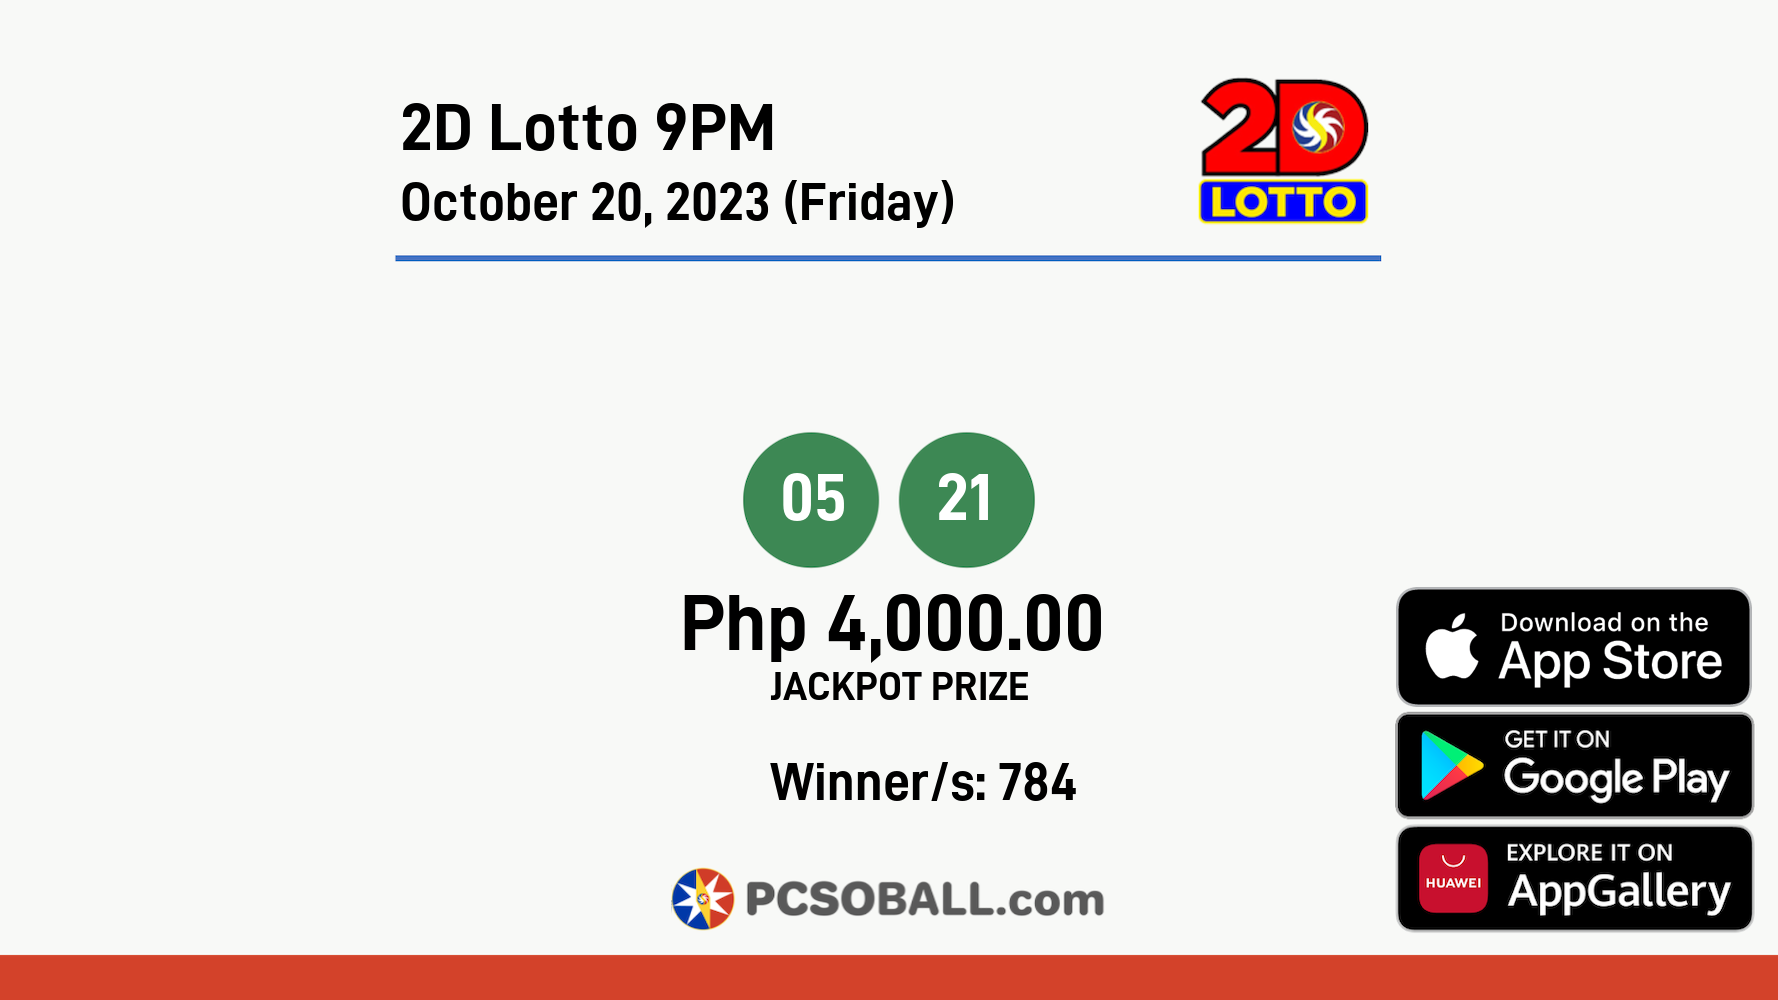 2D Lotto 9PM October 20, 2023 (Friday) Result